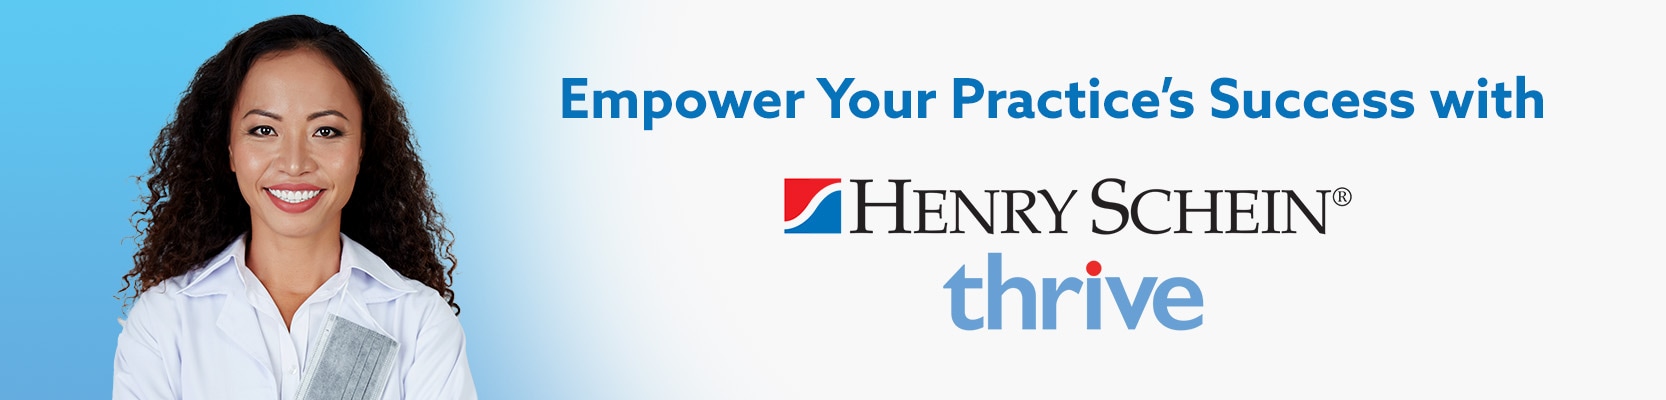 Empowering Your Practiceâ€™s Success with Henry Schein Thrive